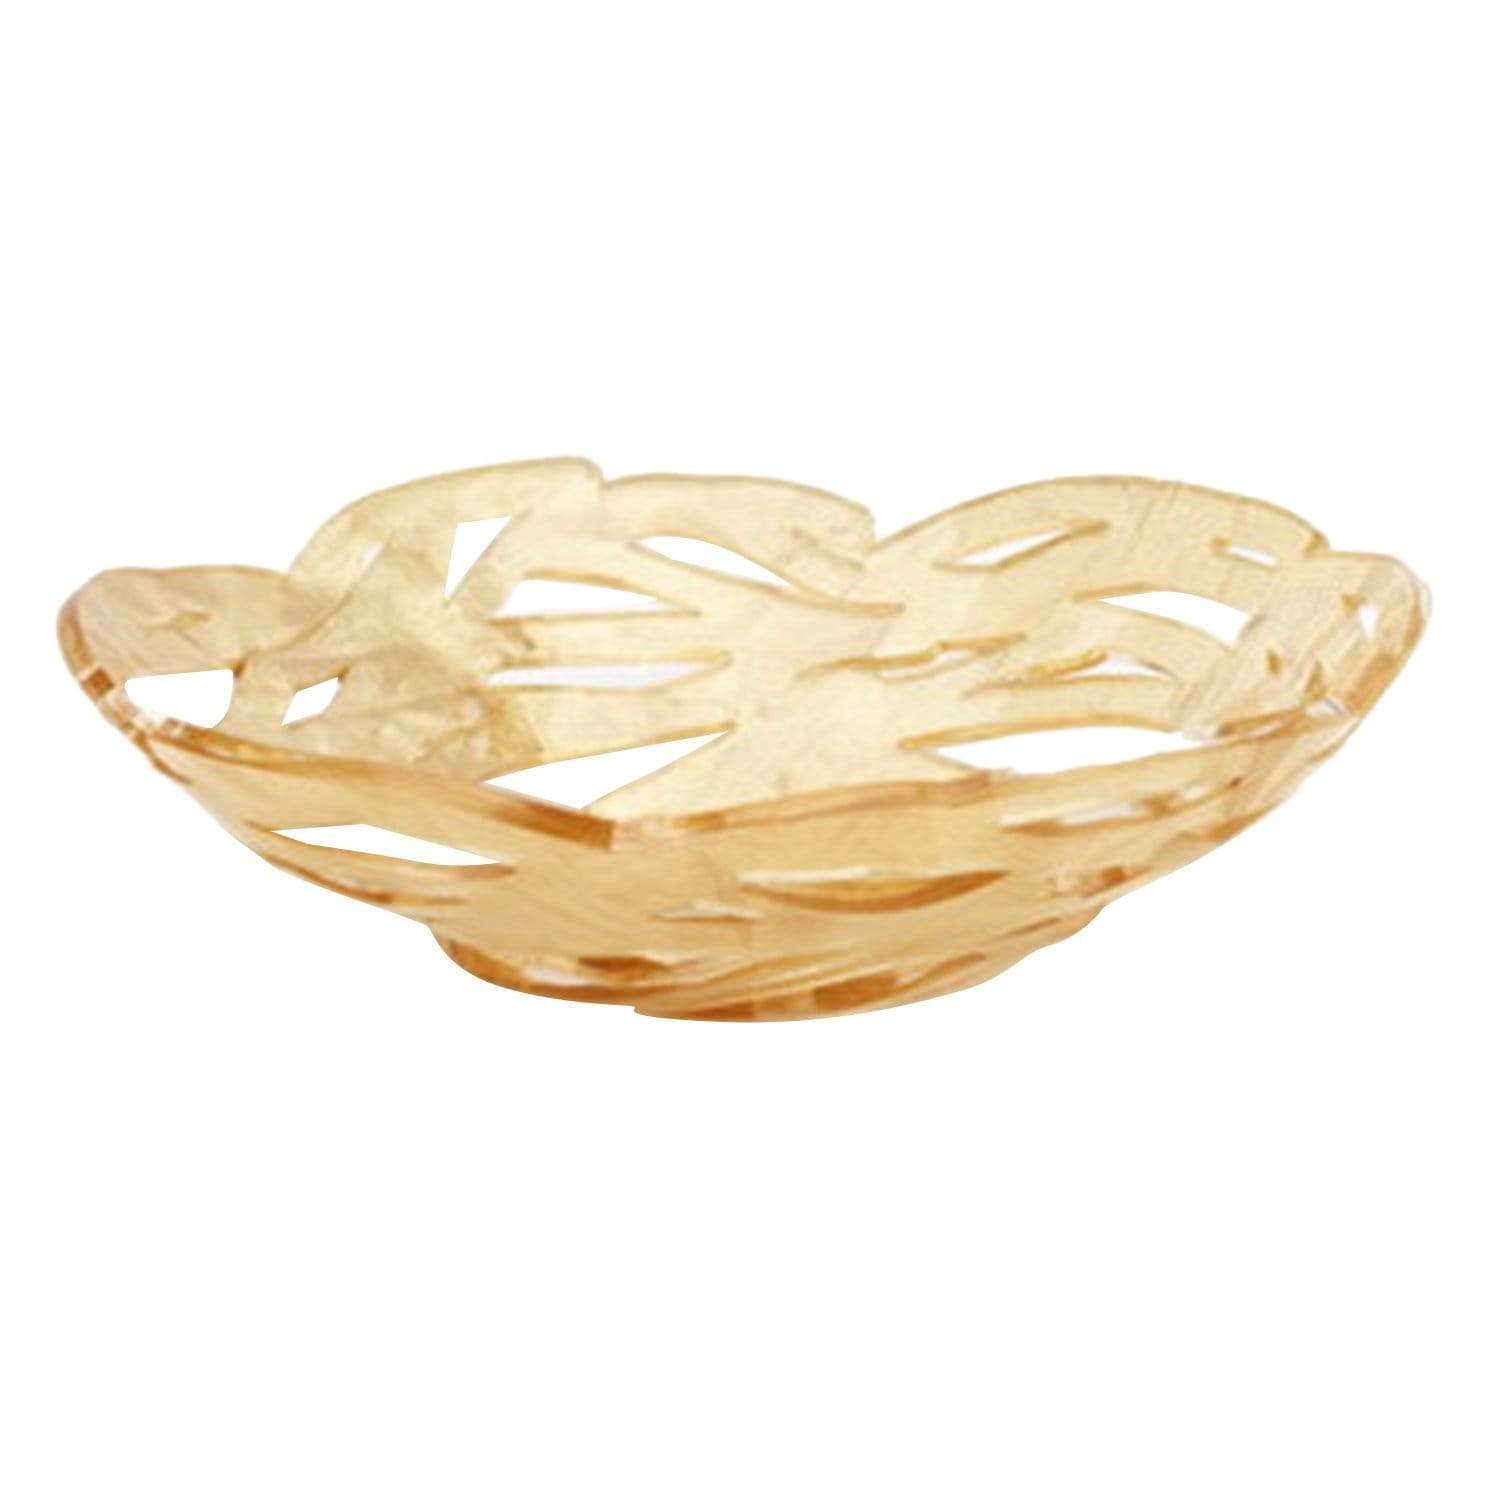 Platex Old Gold Acrylic Bowl with 1kg chocolate - 44 cm - 430440181 - Jashanmal Home